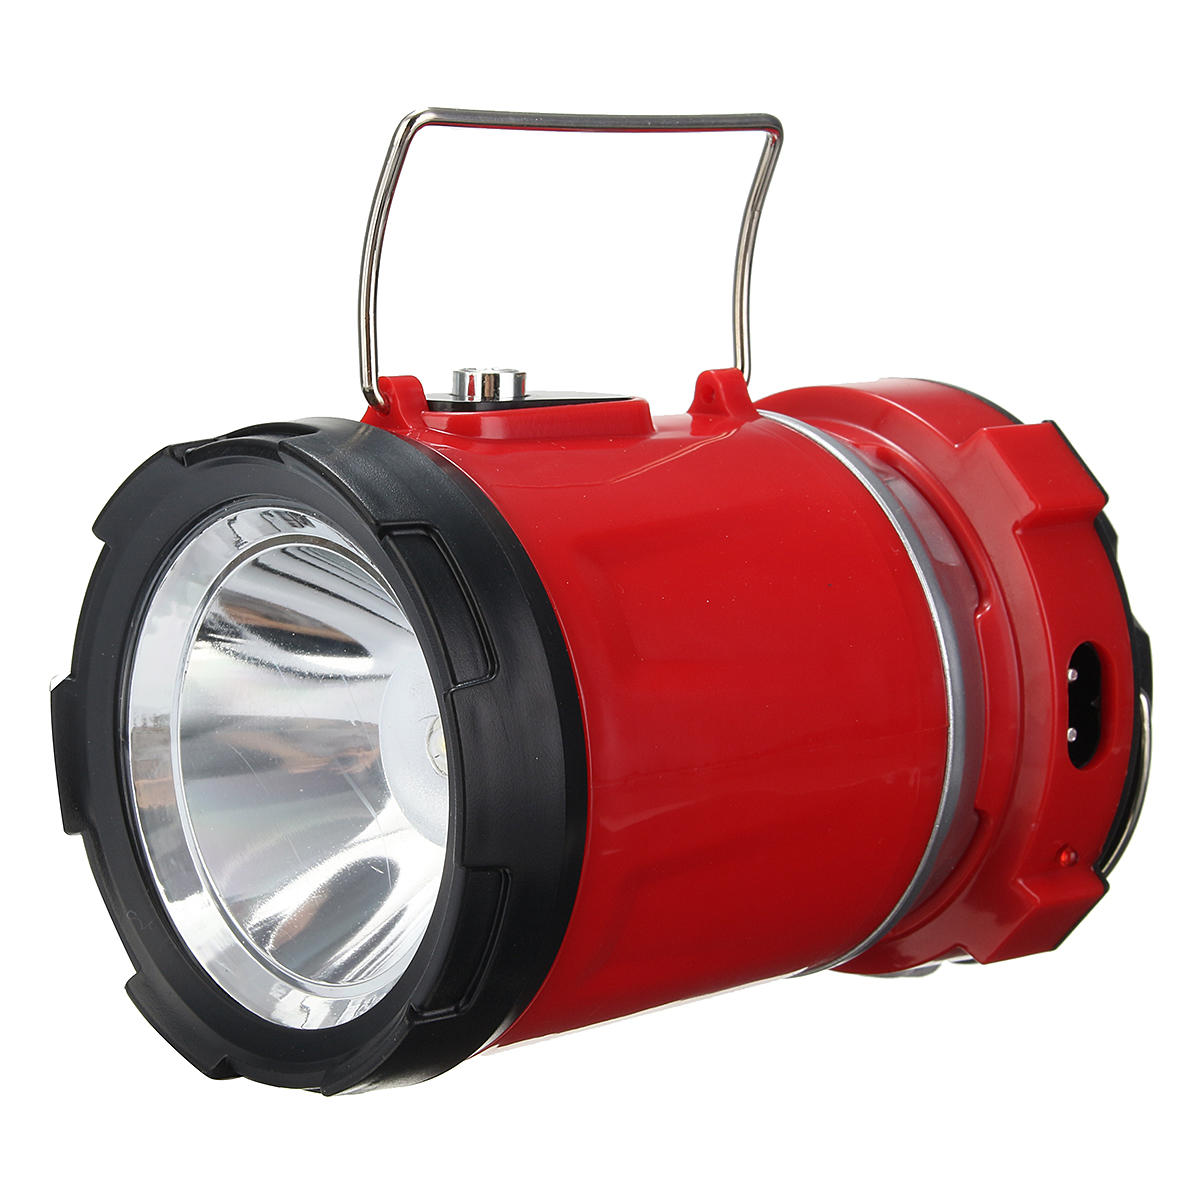 IPRee™ Portable Collapsible 5W LED Light Camp Solar DC Rechargeable Lantern Emergency Torch